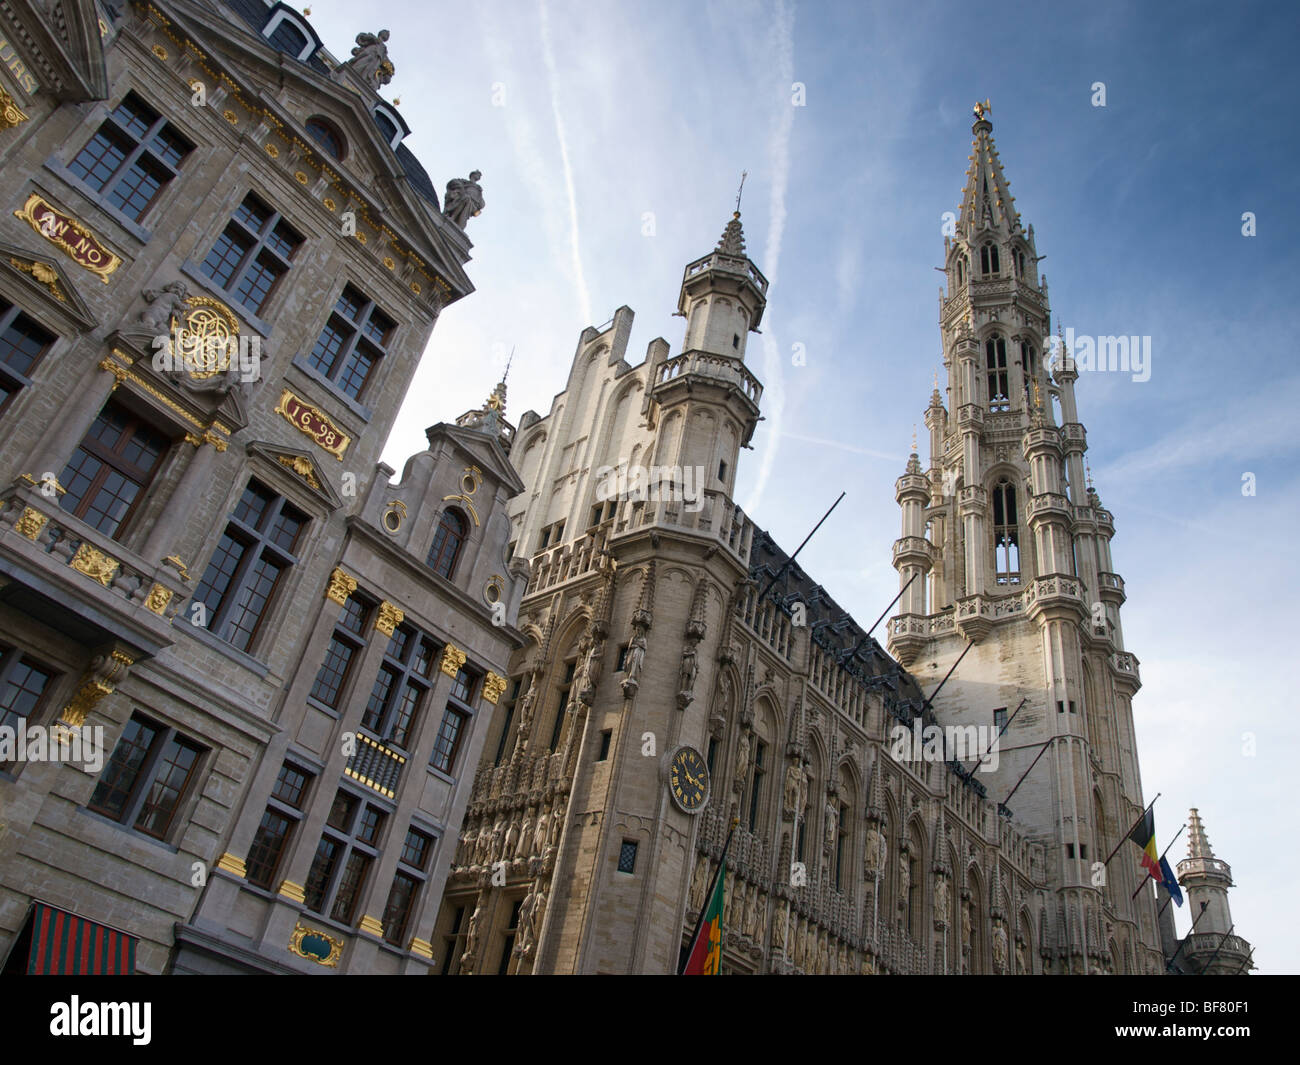 Dynamic image of the 17th century buildings on the Grote Markt , Brussels, Belgium Stock Photo